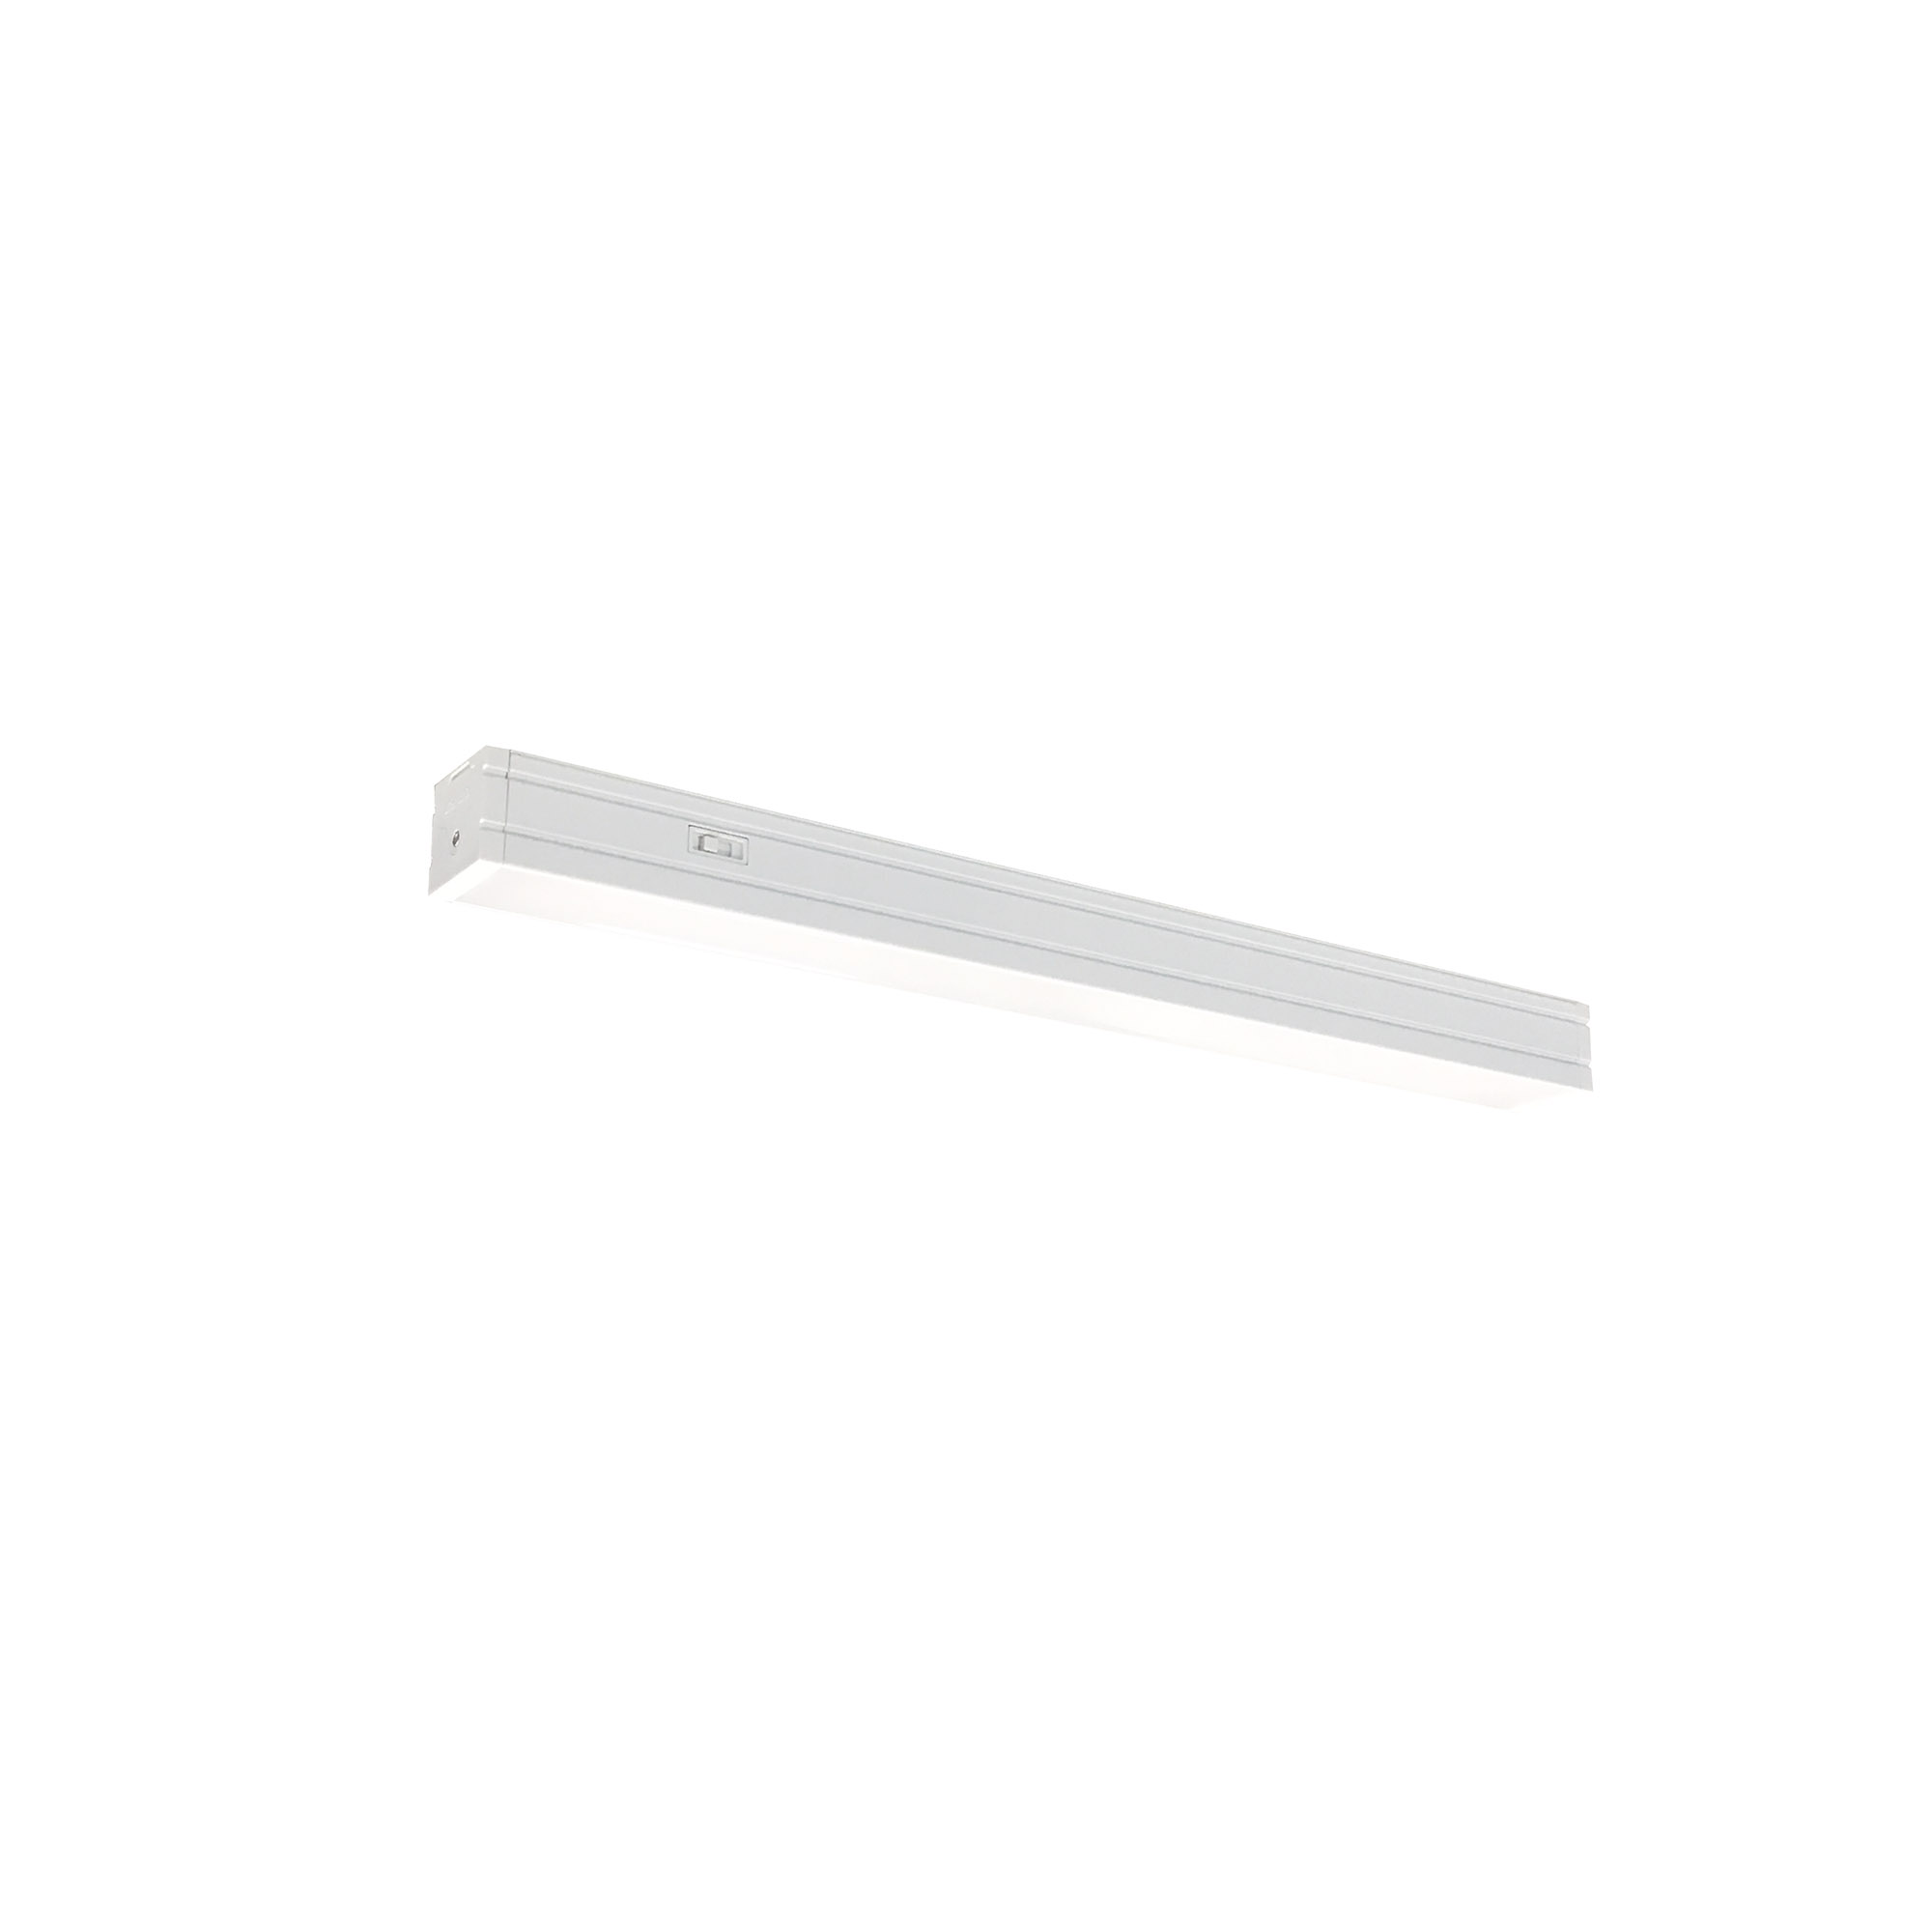 NUDTW-9816
13W CCT Sel 120V Dim White 16&quot; 
LED Linear Frosted Lens